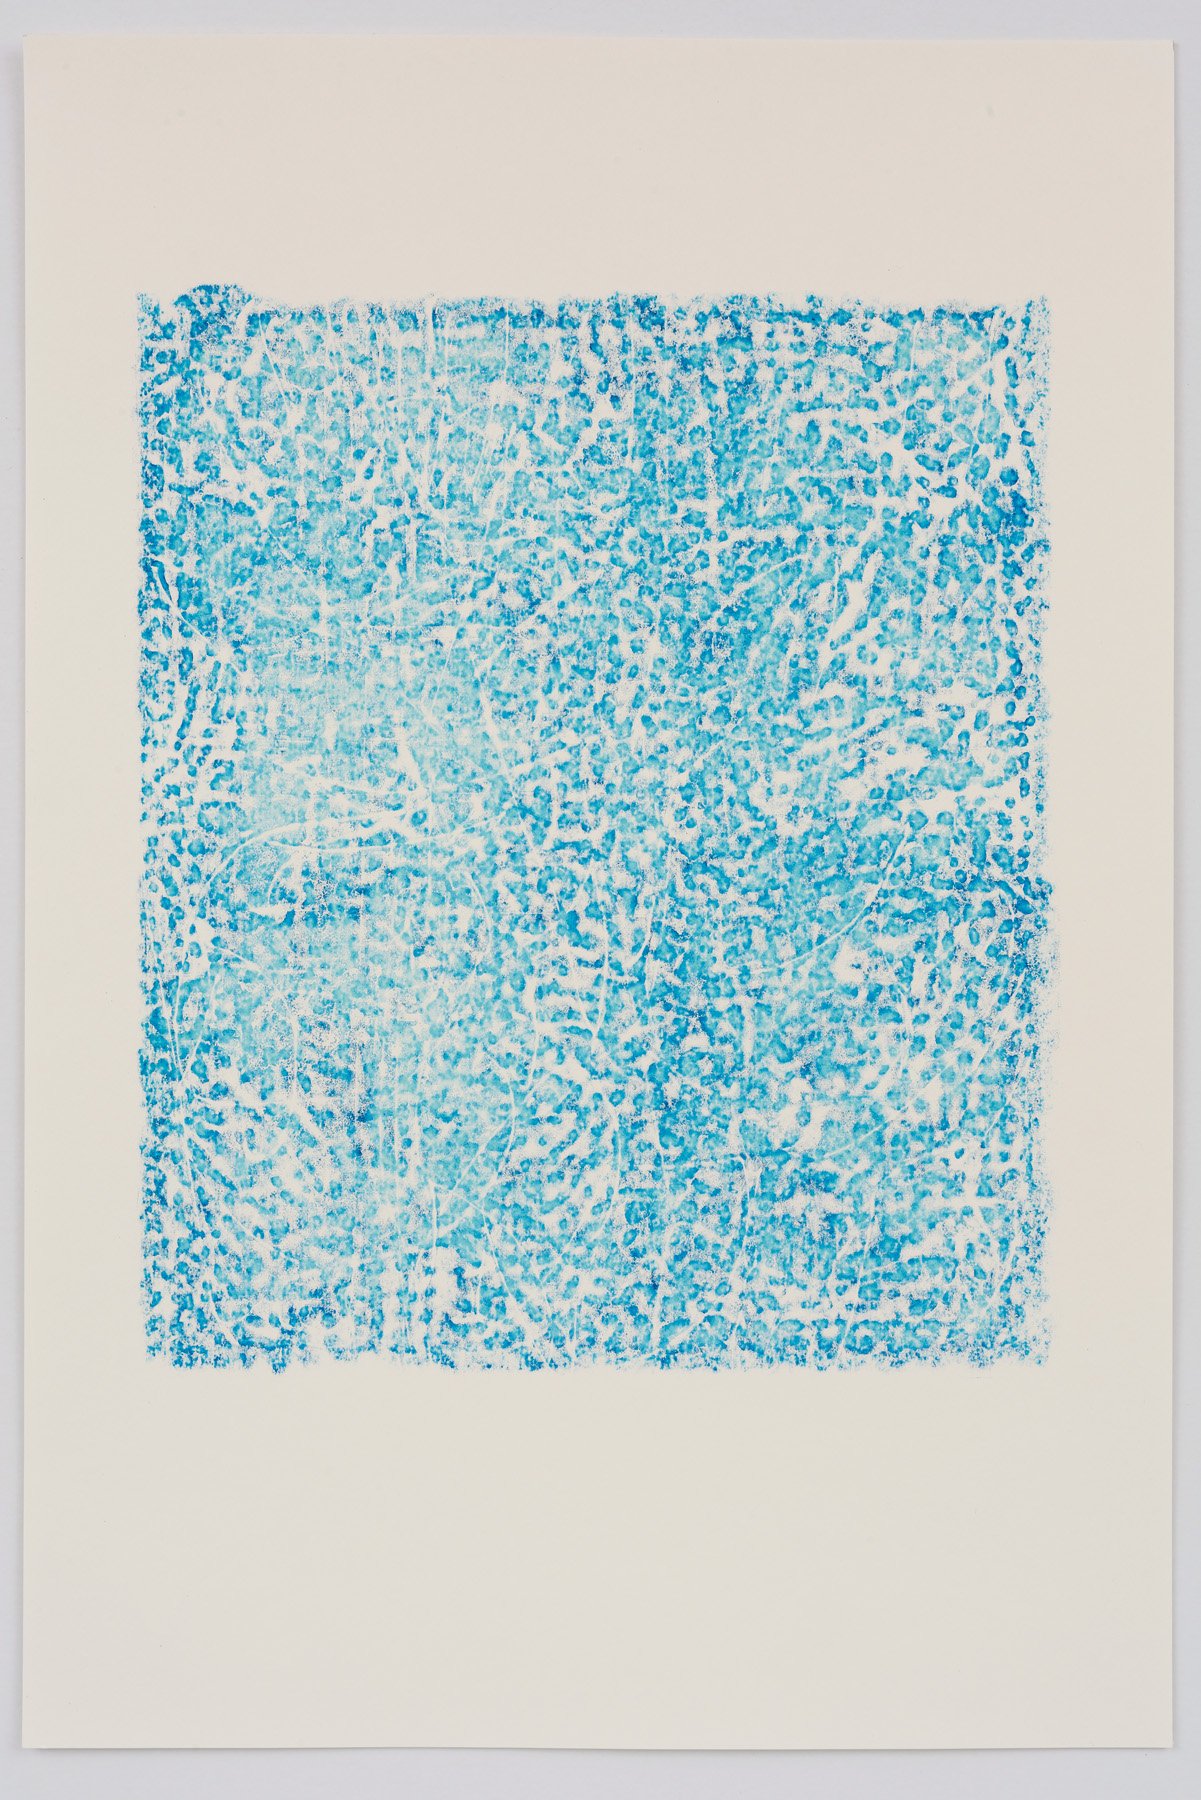  Untitled (Blue Series) VI   2022   Oil on hot pressed Saunders Waterford paper   Paper size: 51 x 34 cm, Print size: 32 x 28 cm   Monoprint (one of one)  